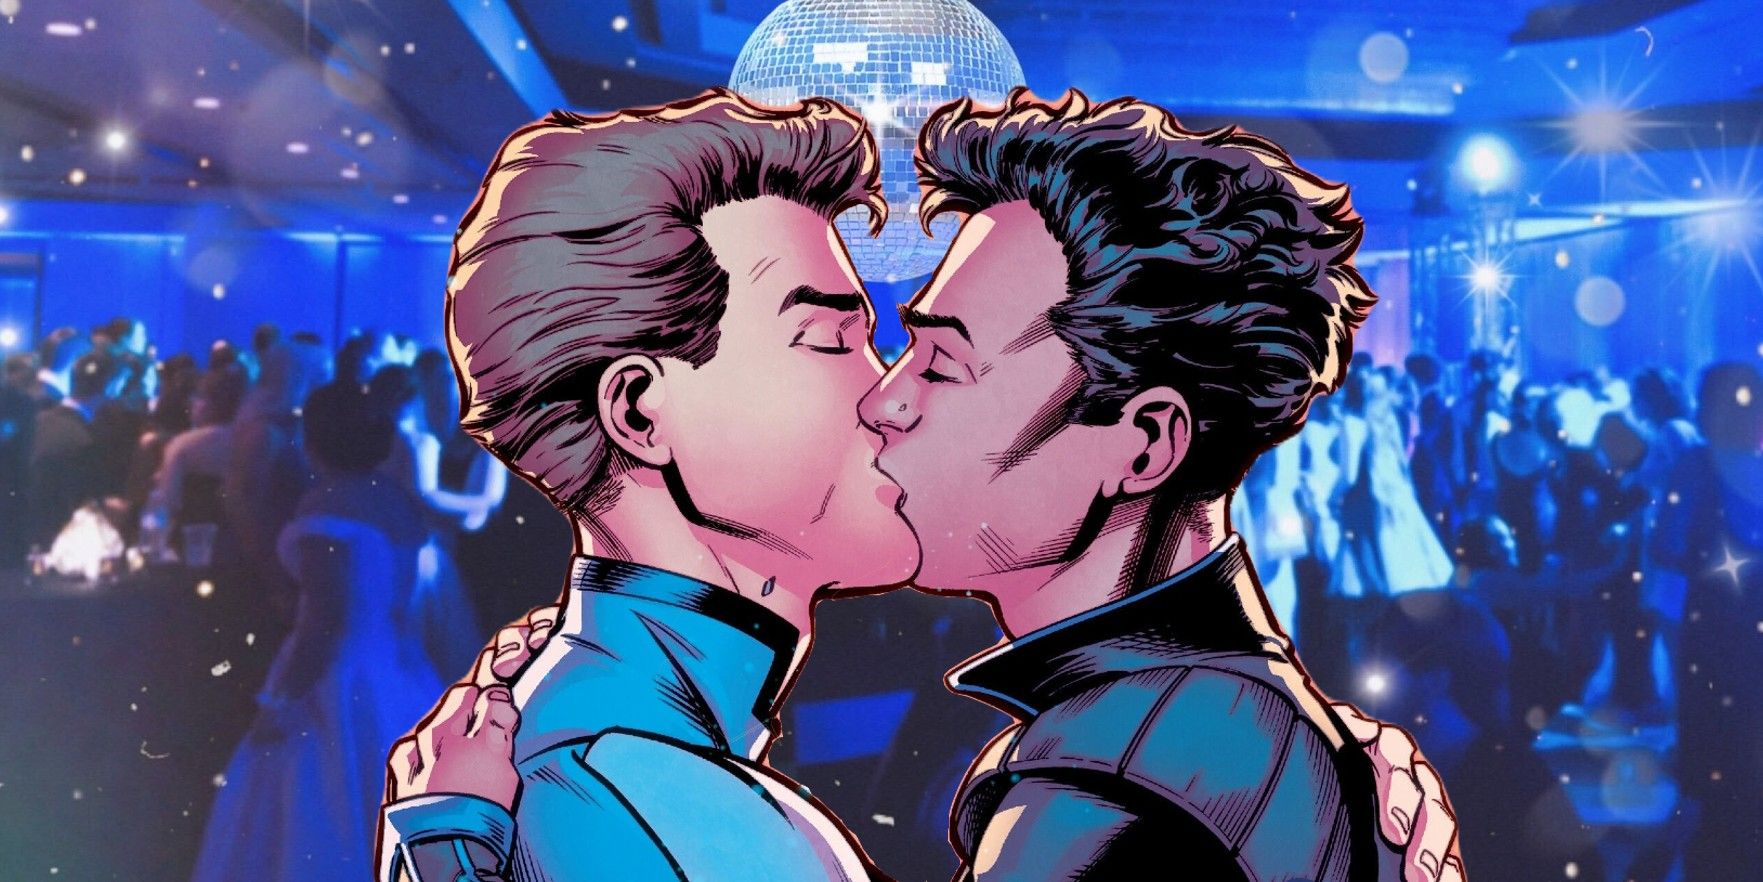 X-Men’s Iceman Makes History With The Prom Date His Fans Dreamed Of